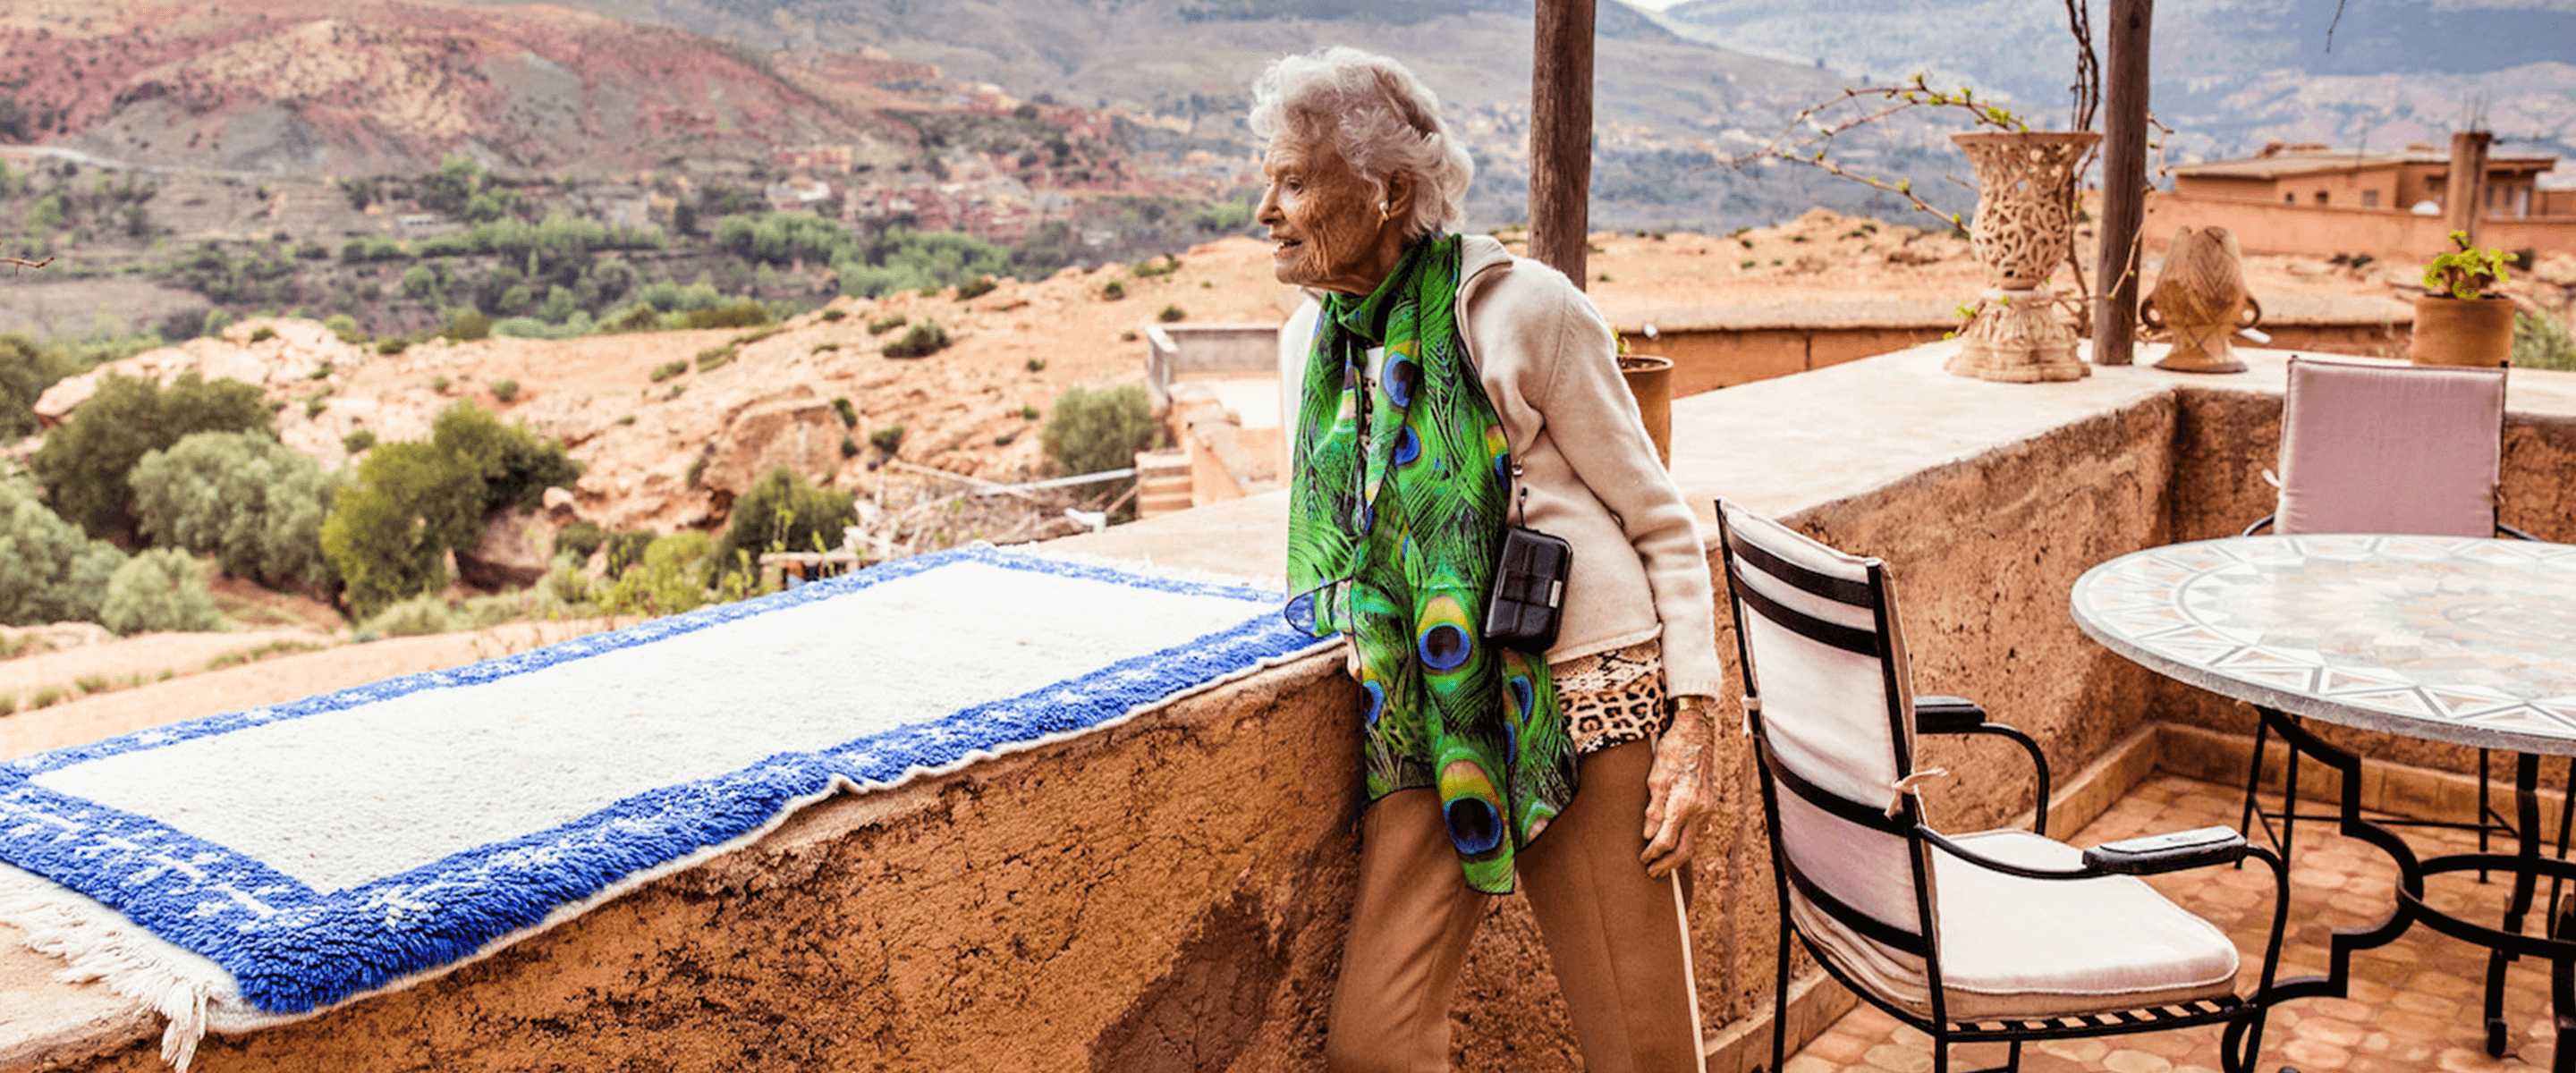 Eve Branson looking out over the Moroccan hillside from a balcony